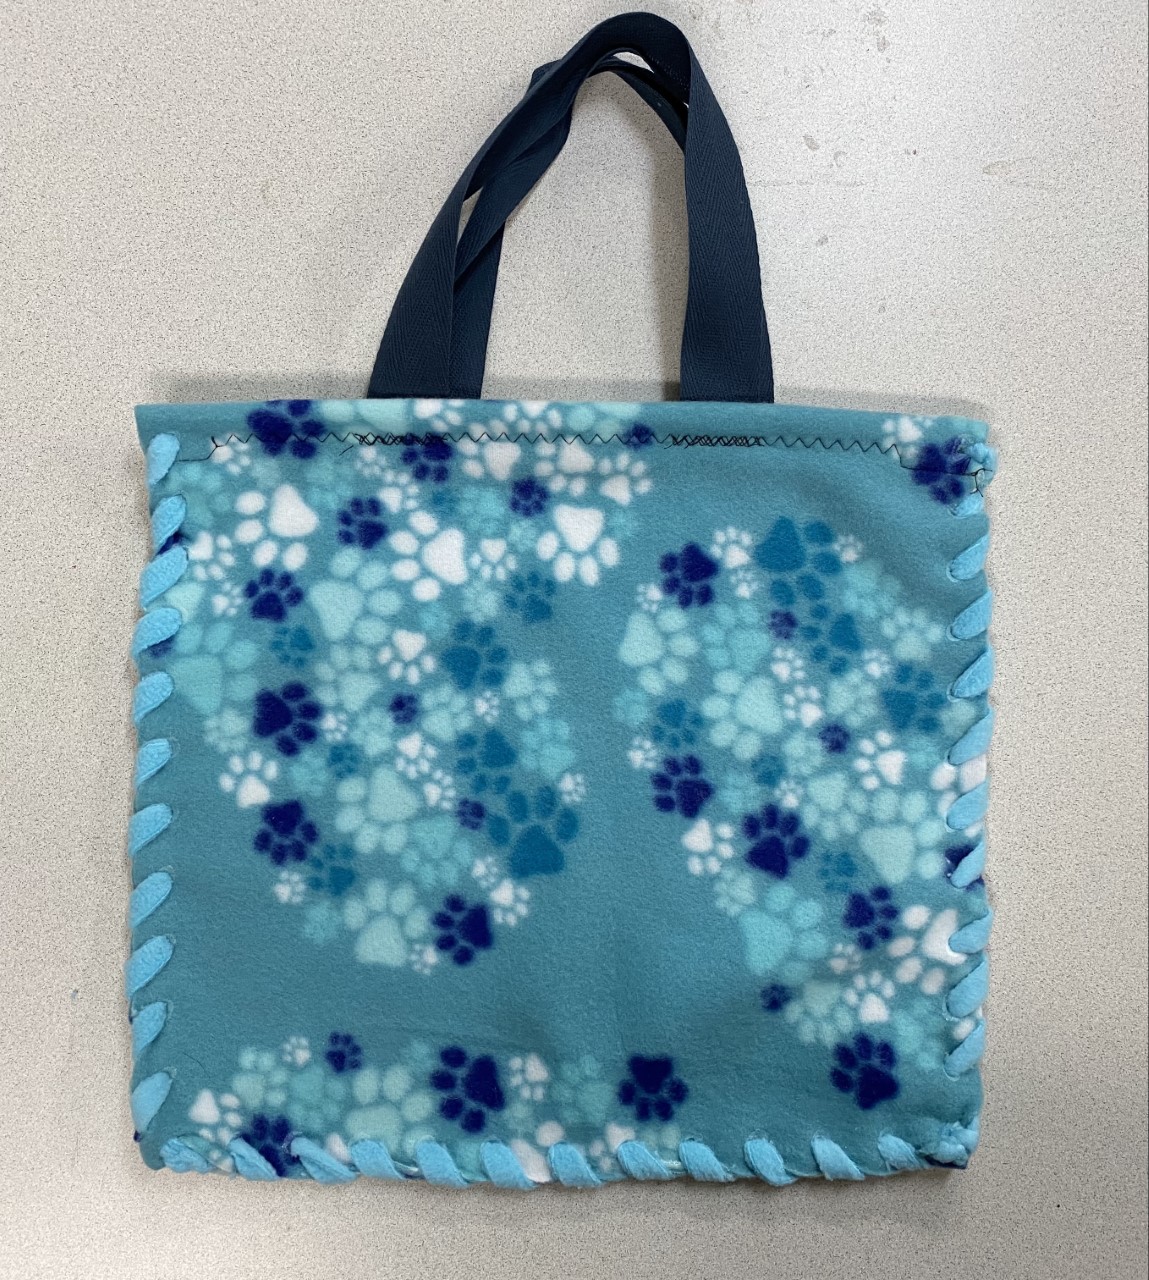 13" fleece tote bag in light teal with teal, blue and white small paw prints, blue tote straps, and teal fleece ribbon to lace with plastic needle